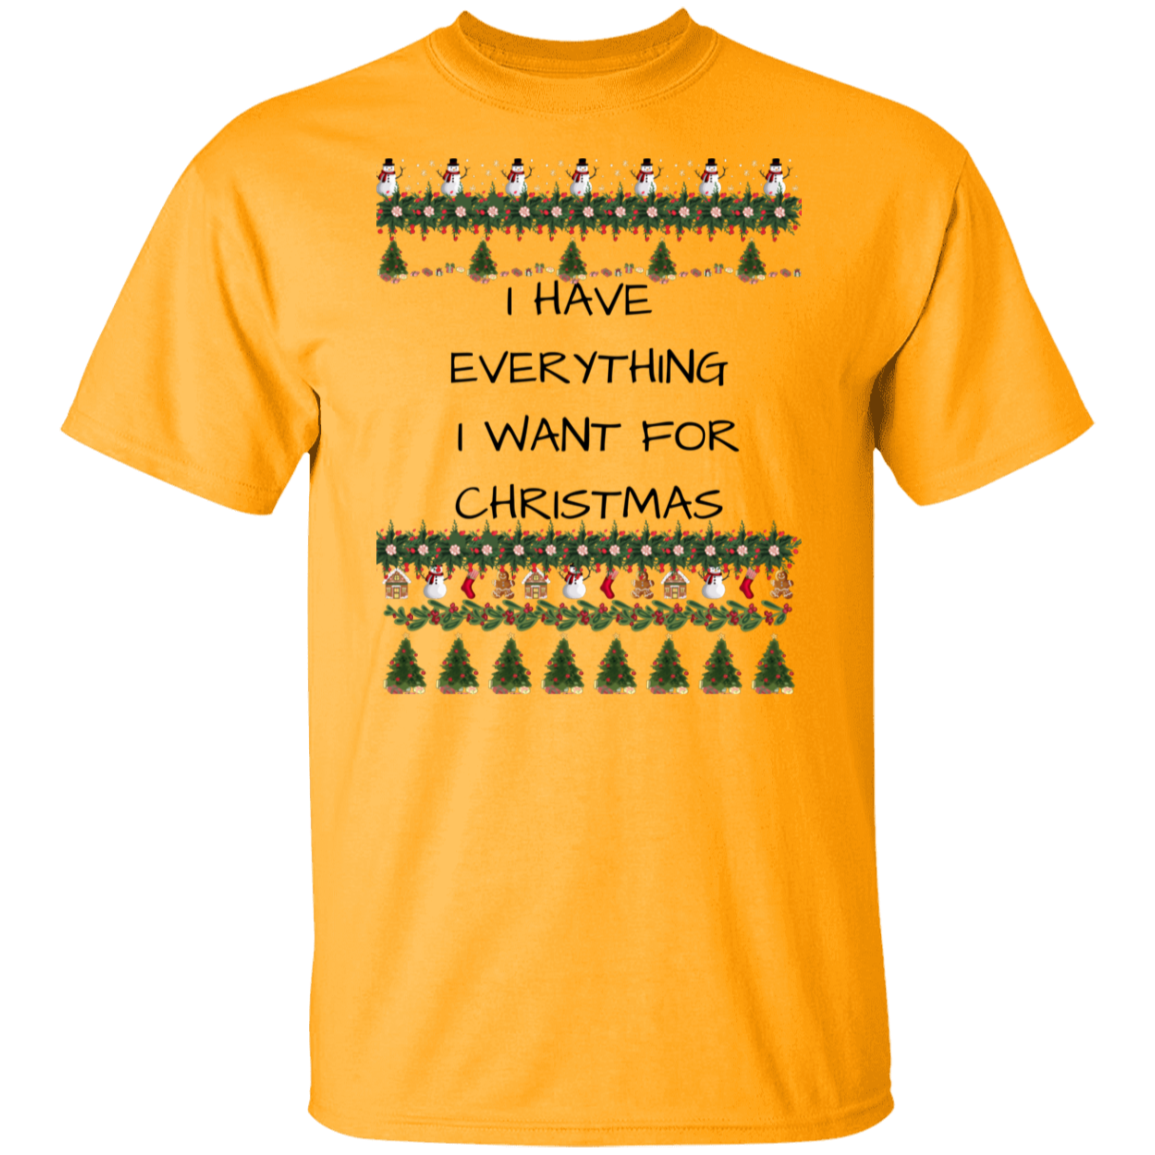 I HAVE EVERYTHING T-Shirt